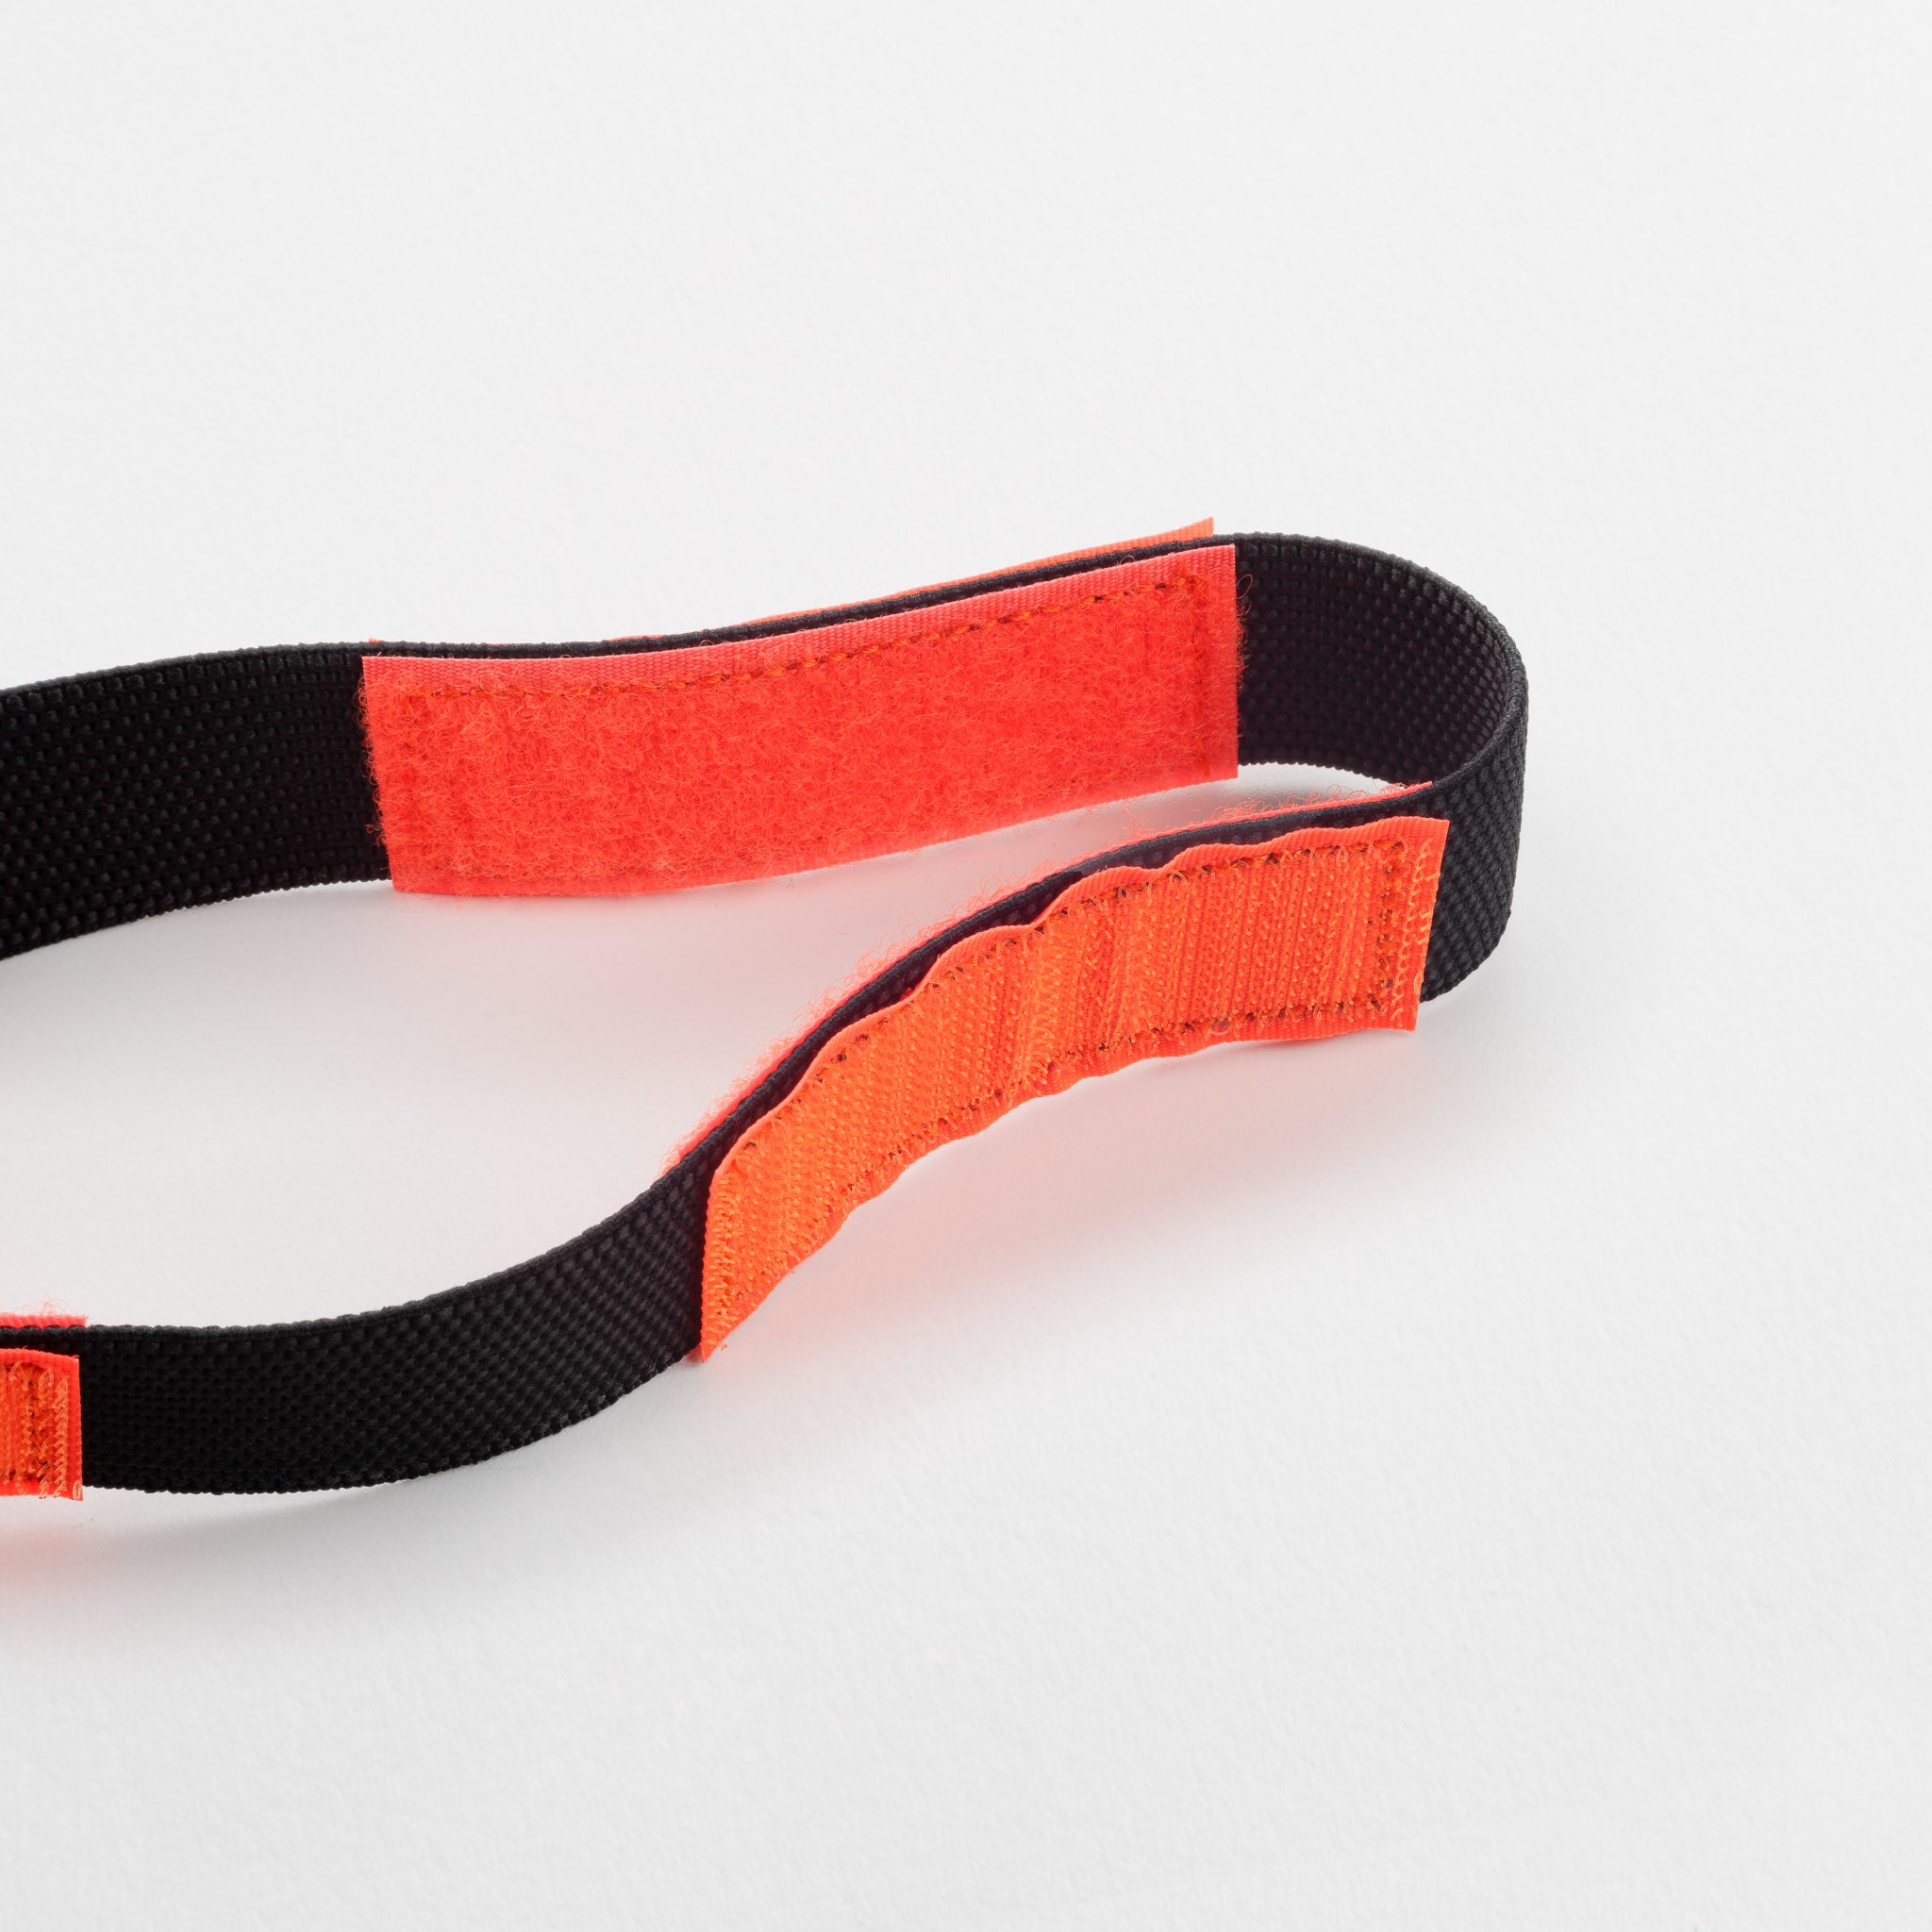 World's Smartest Tie Down Strap - WRAPTIE™ Classic - Hexlox - Hexlox - Anti  Theft for Saddles, Wheels and More.